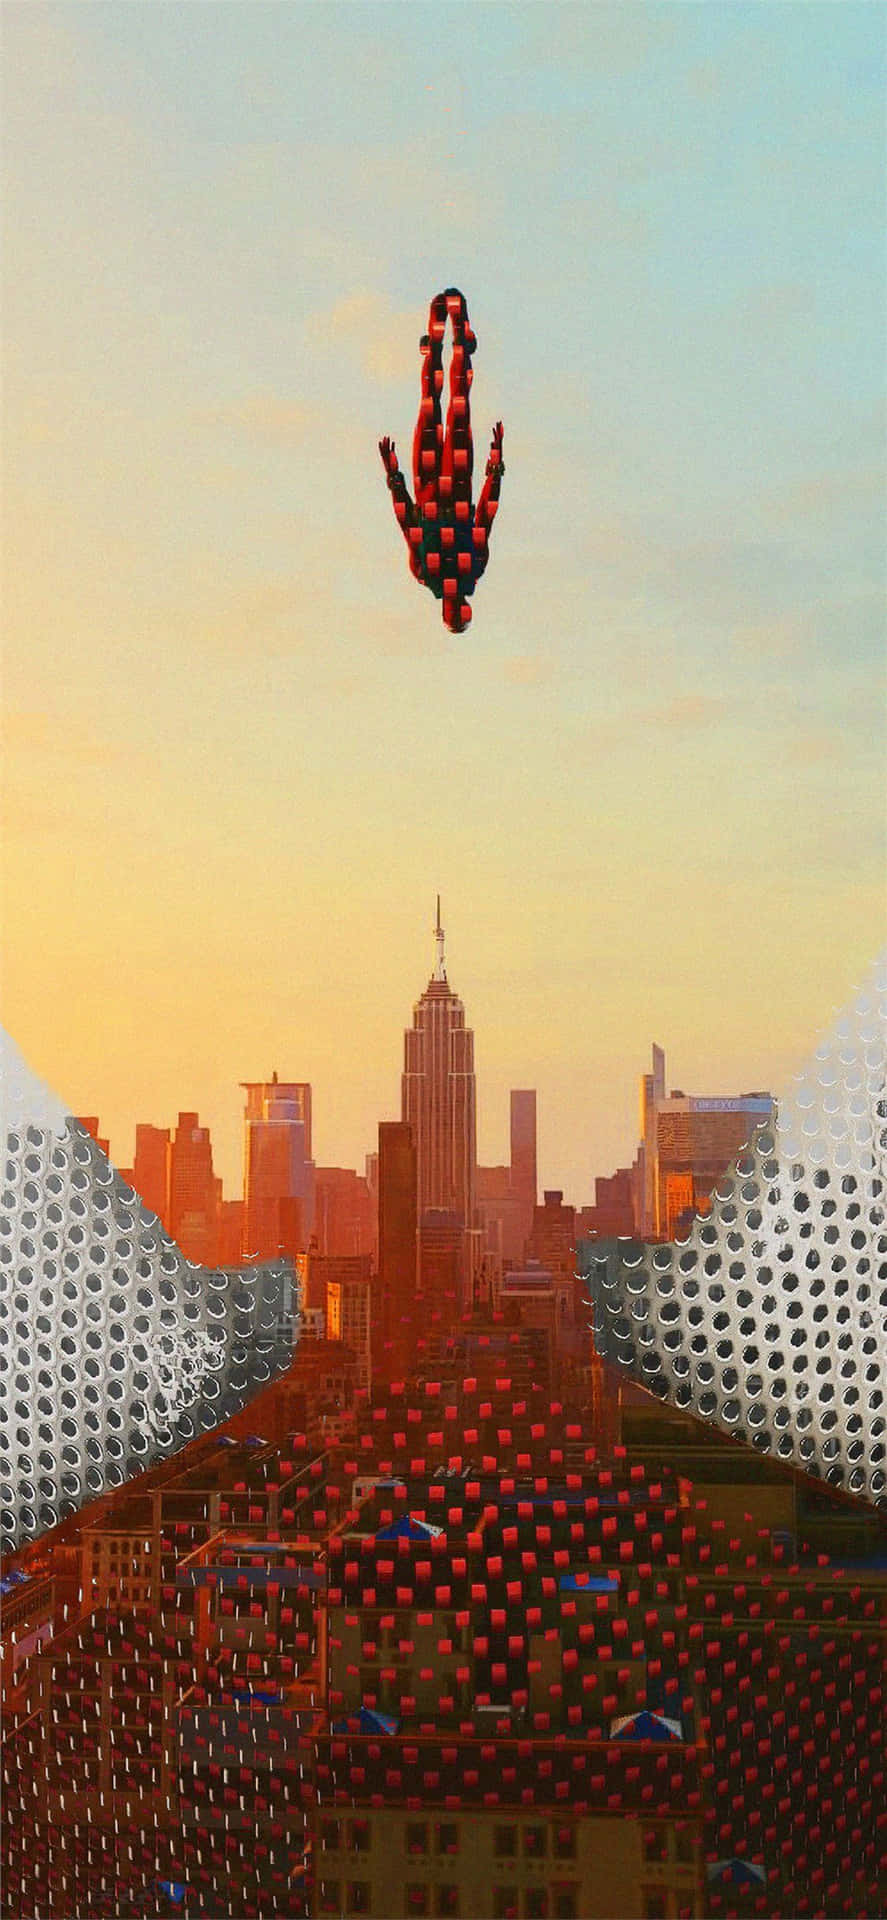 Spiderman Webswinging Through a Cityscape Wallpaper